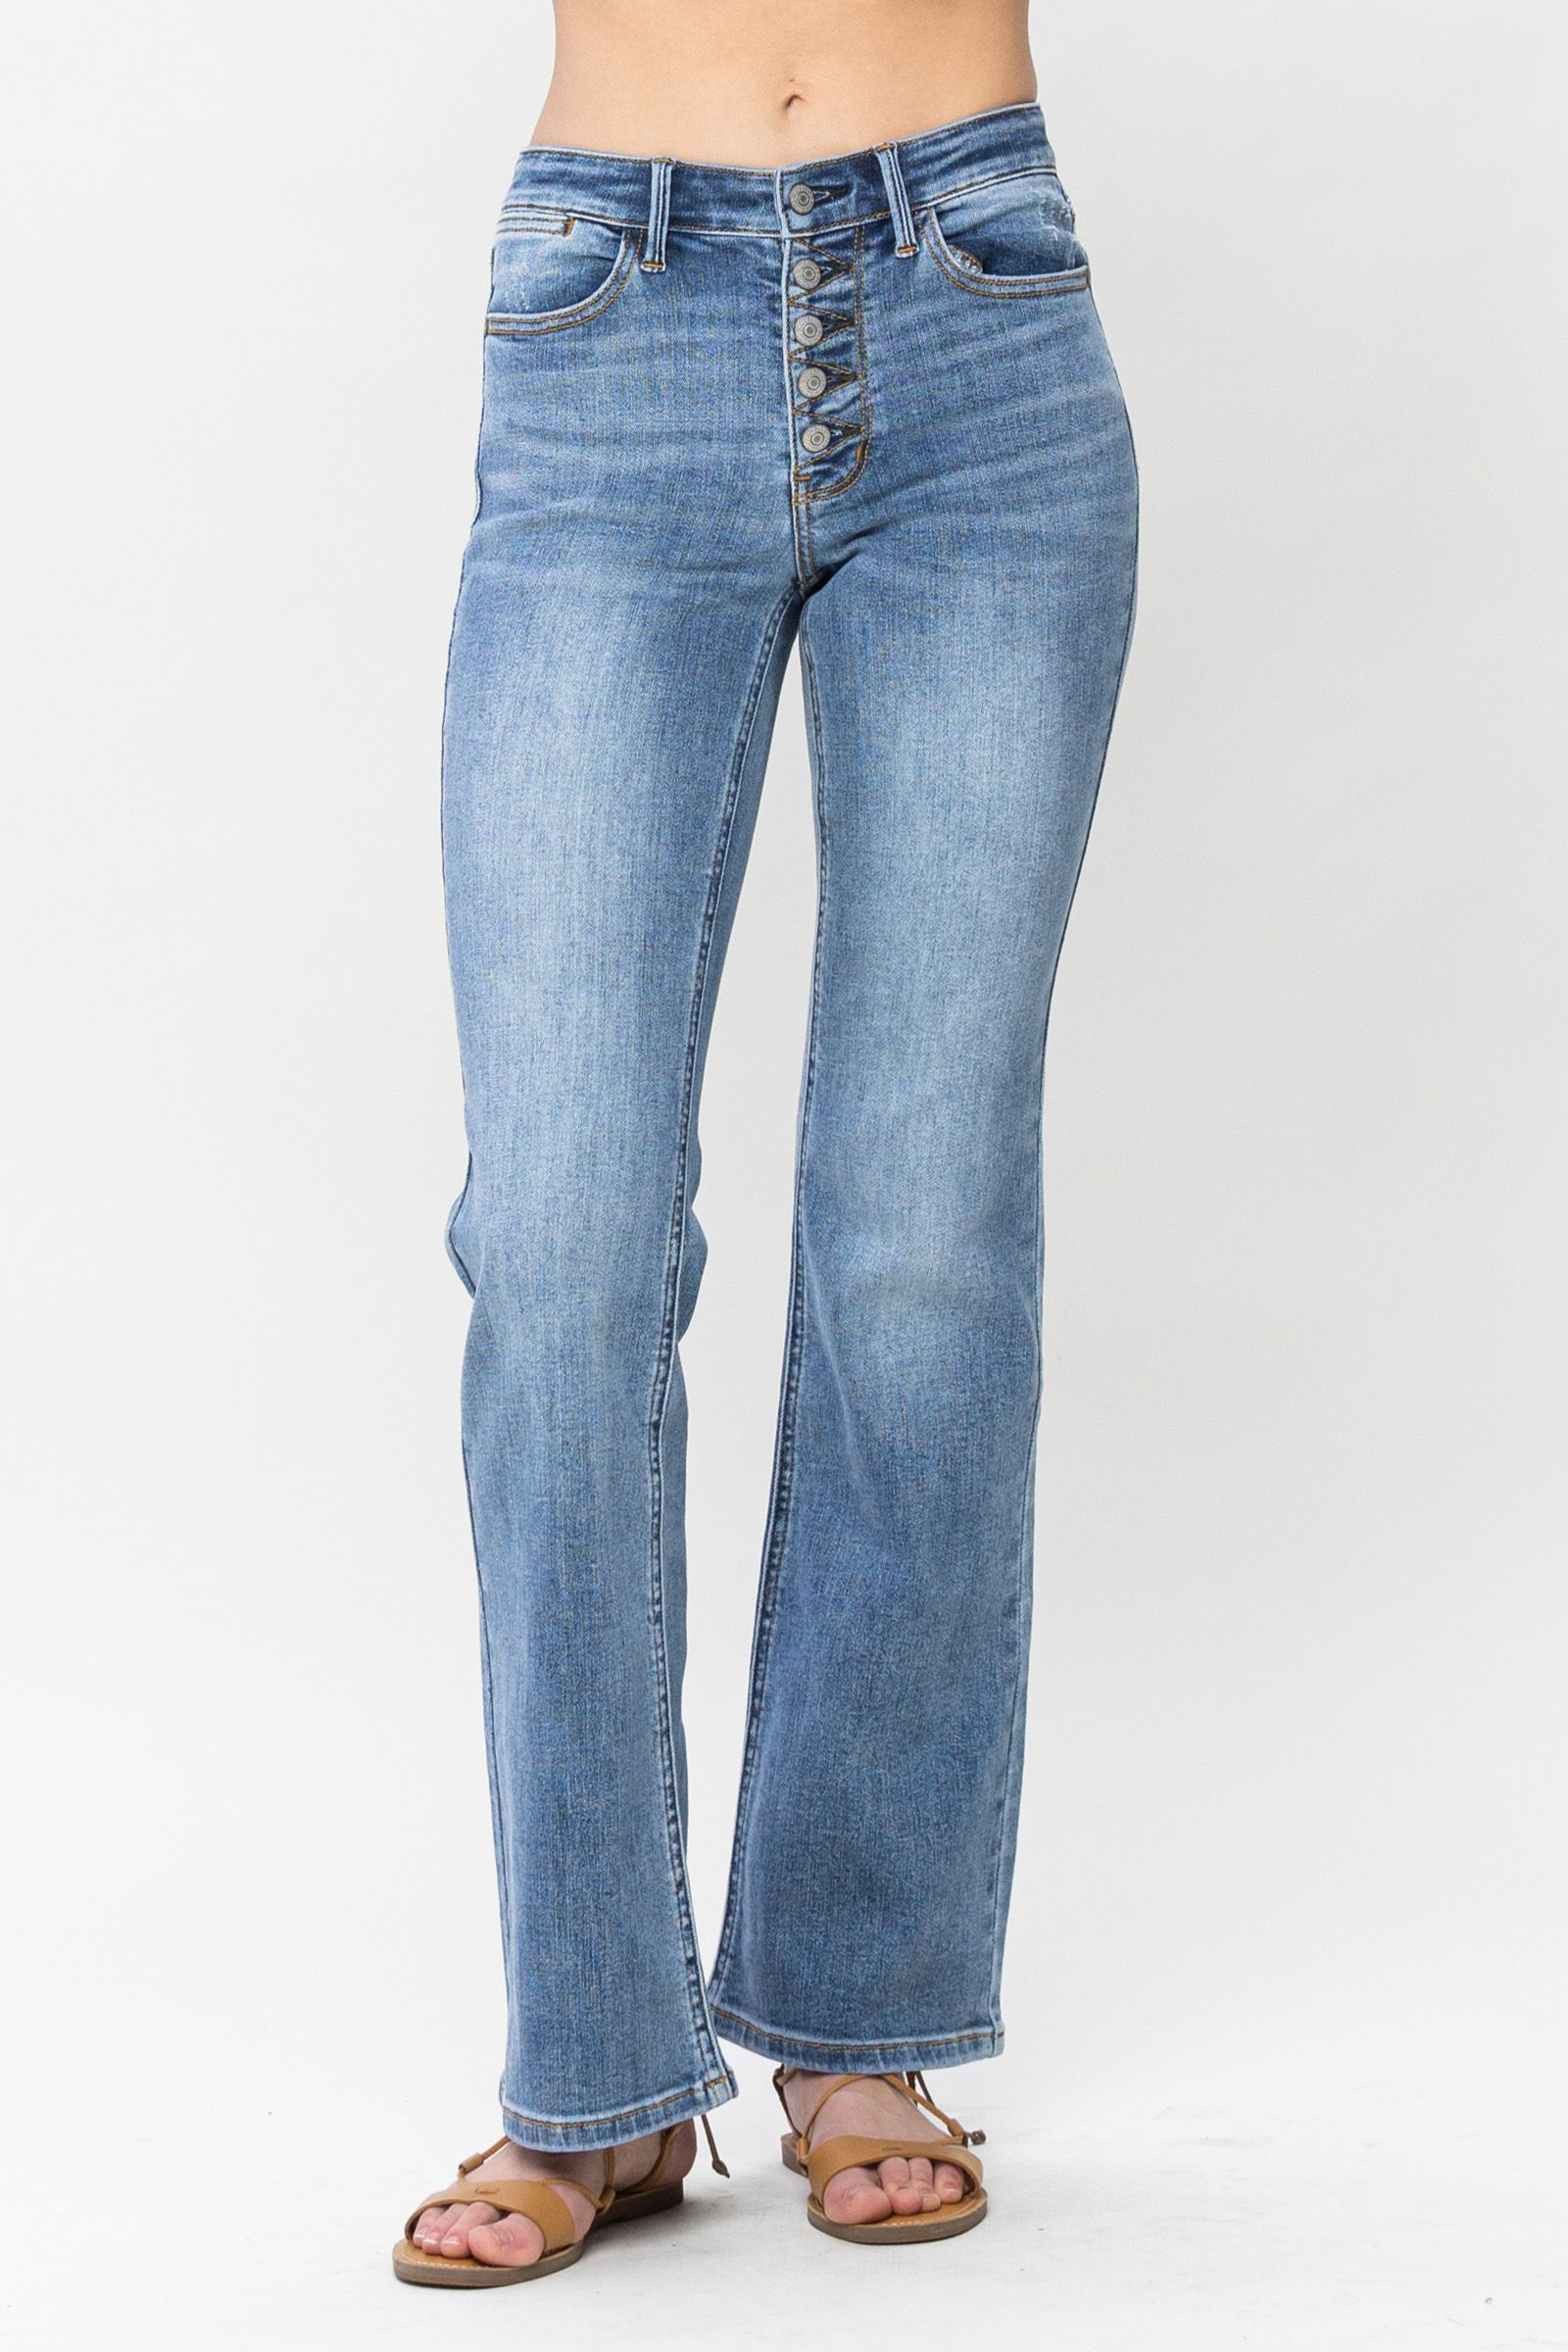 Judy blue curvy MID RISE VINTAGE BUTTON FLY BOOTCUT